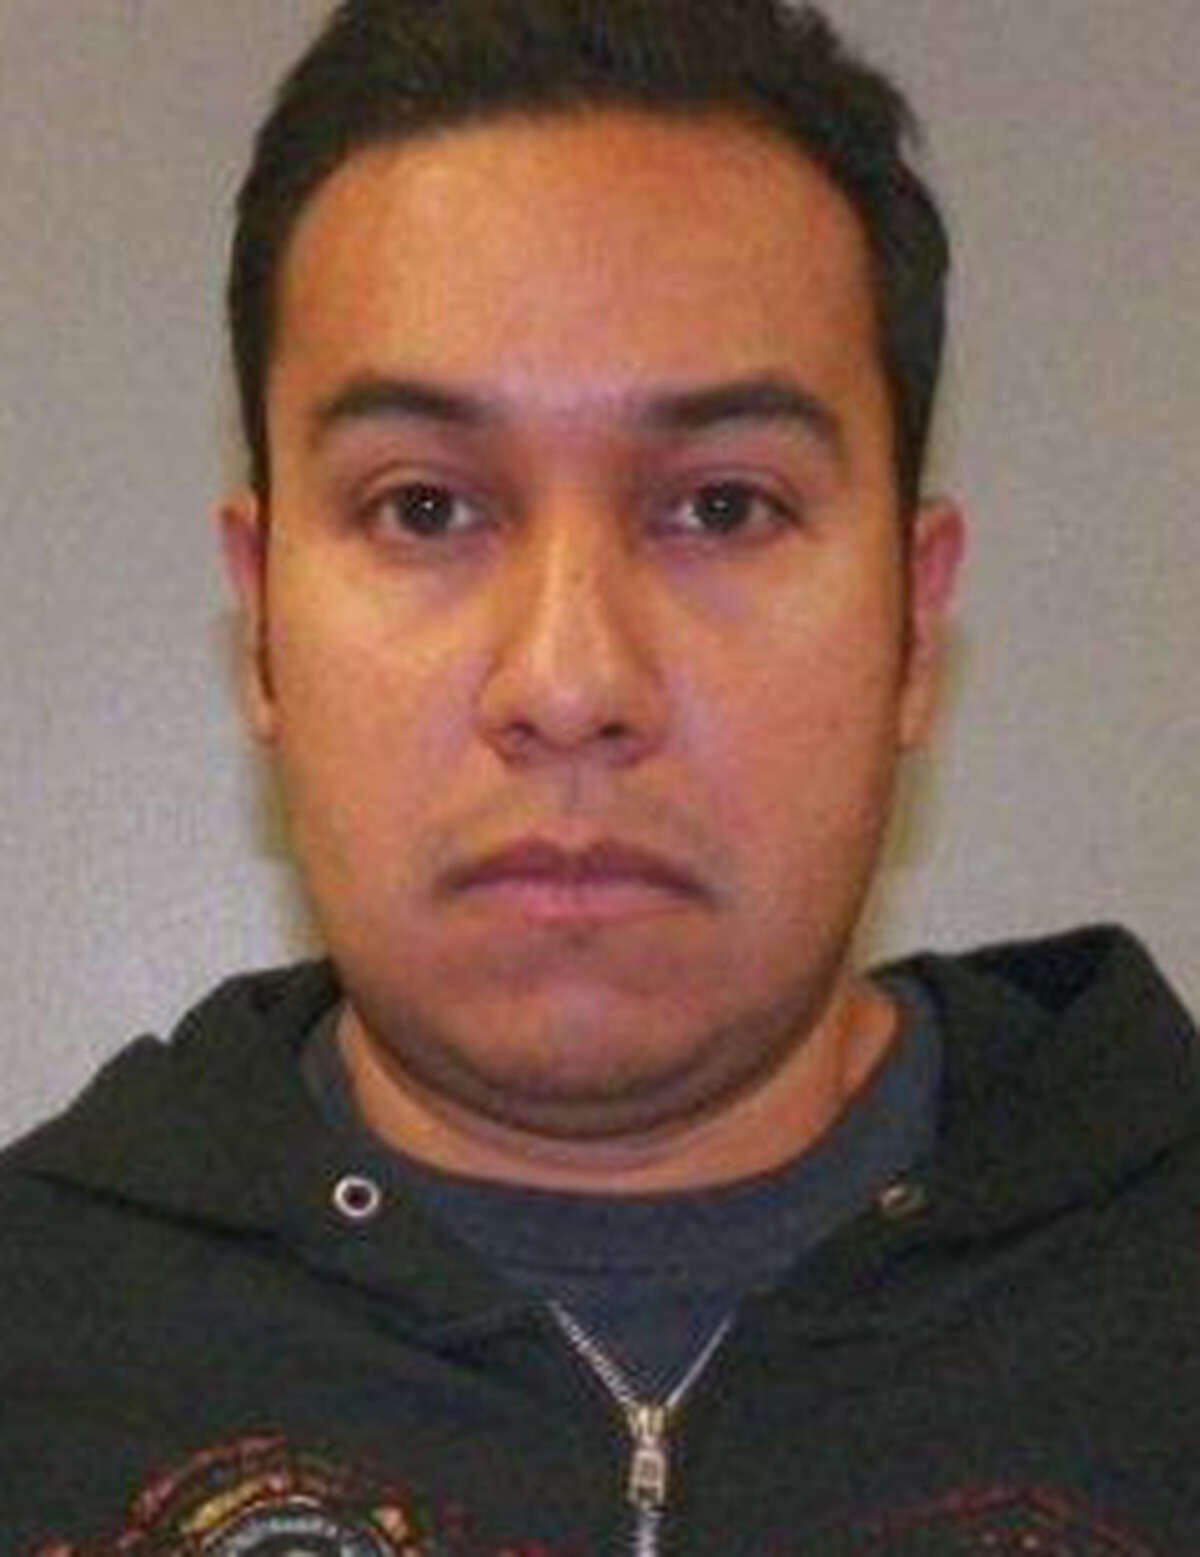 SAFD firefighter Anthony James Moncada, 33, was arrested Tuesday on charges of soliciting prostitution.